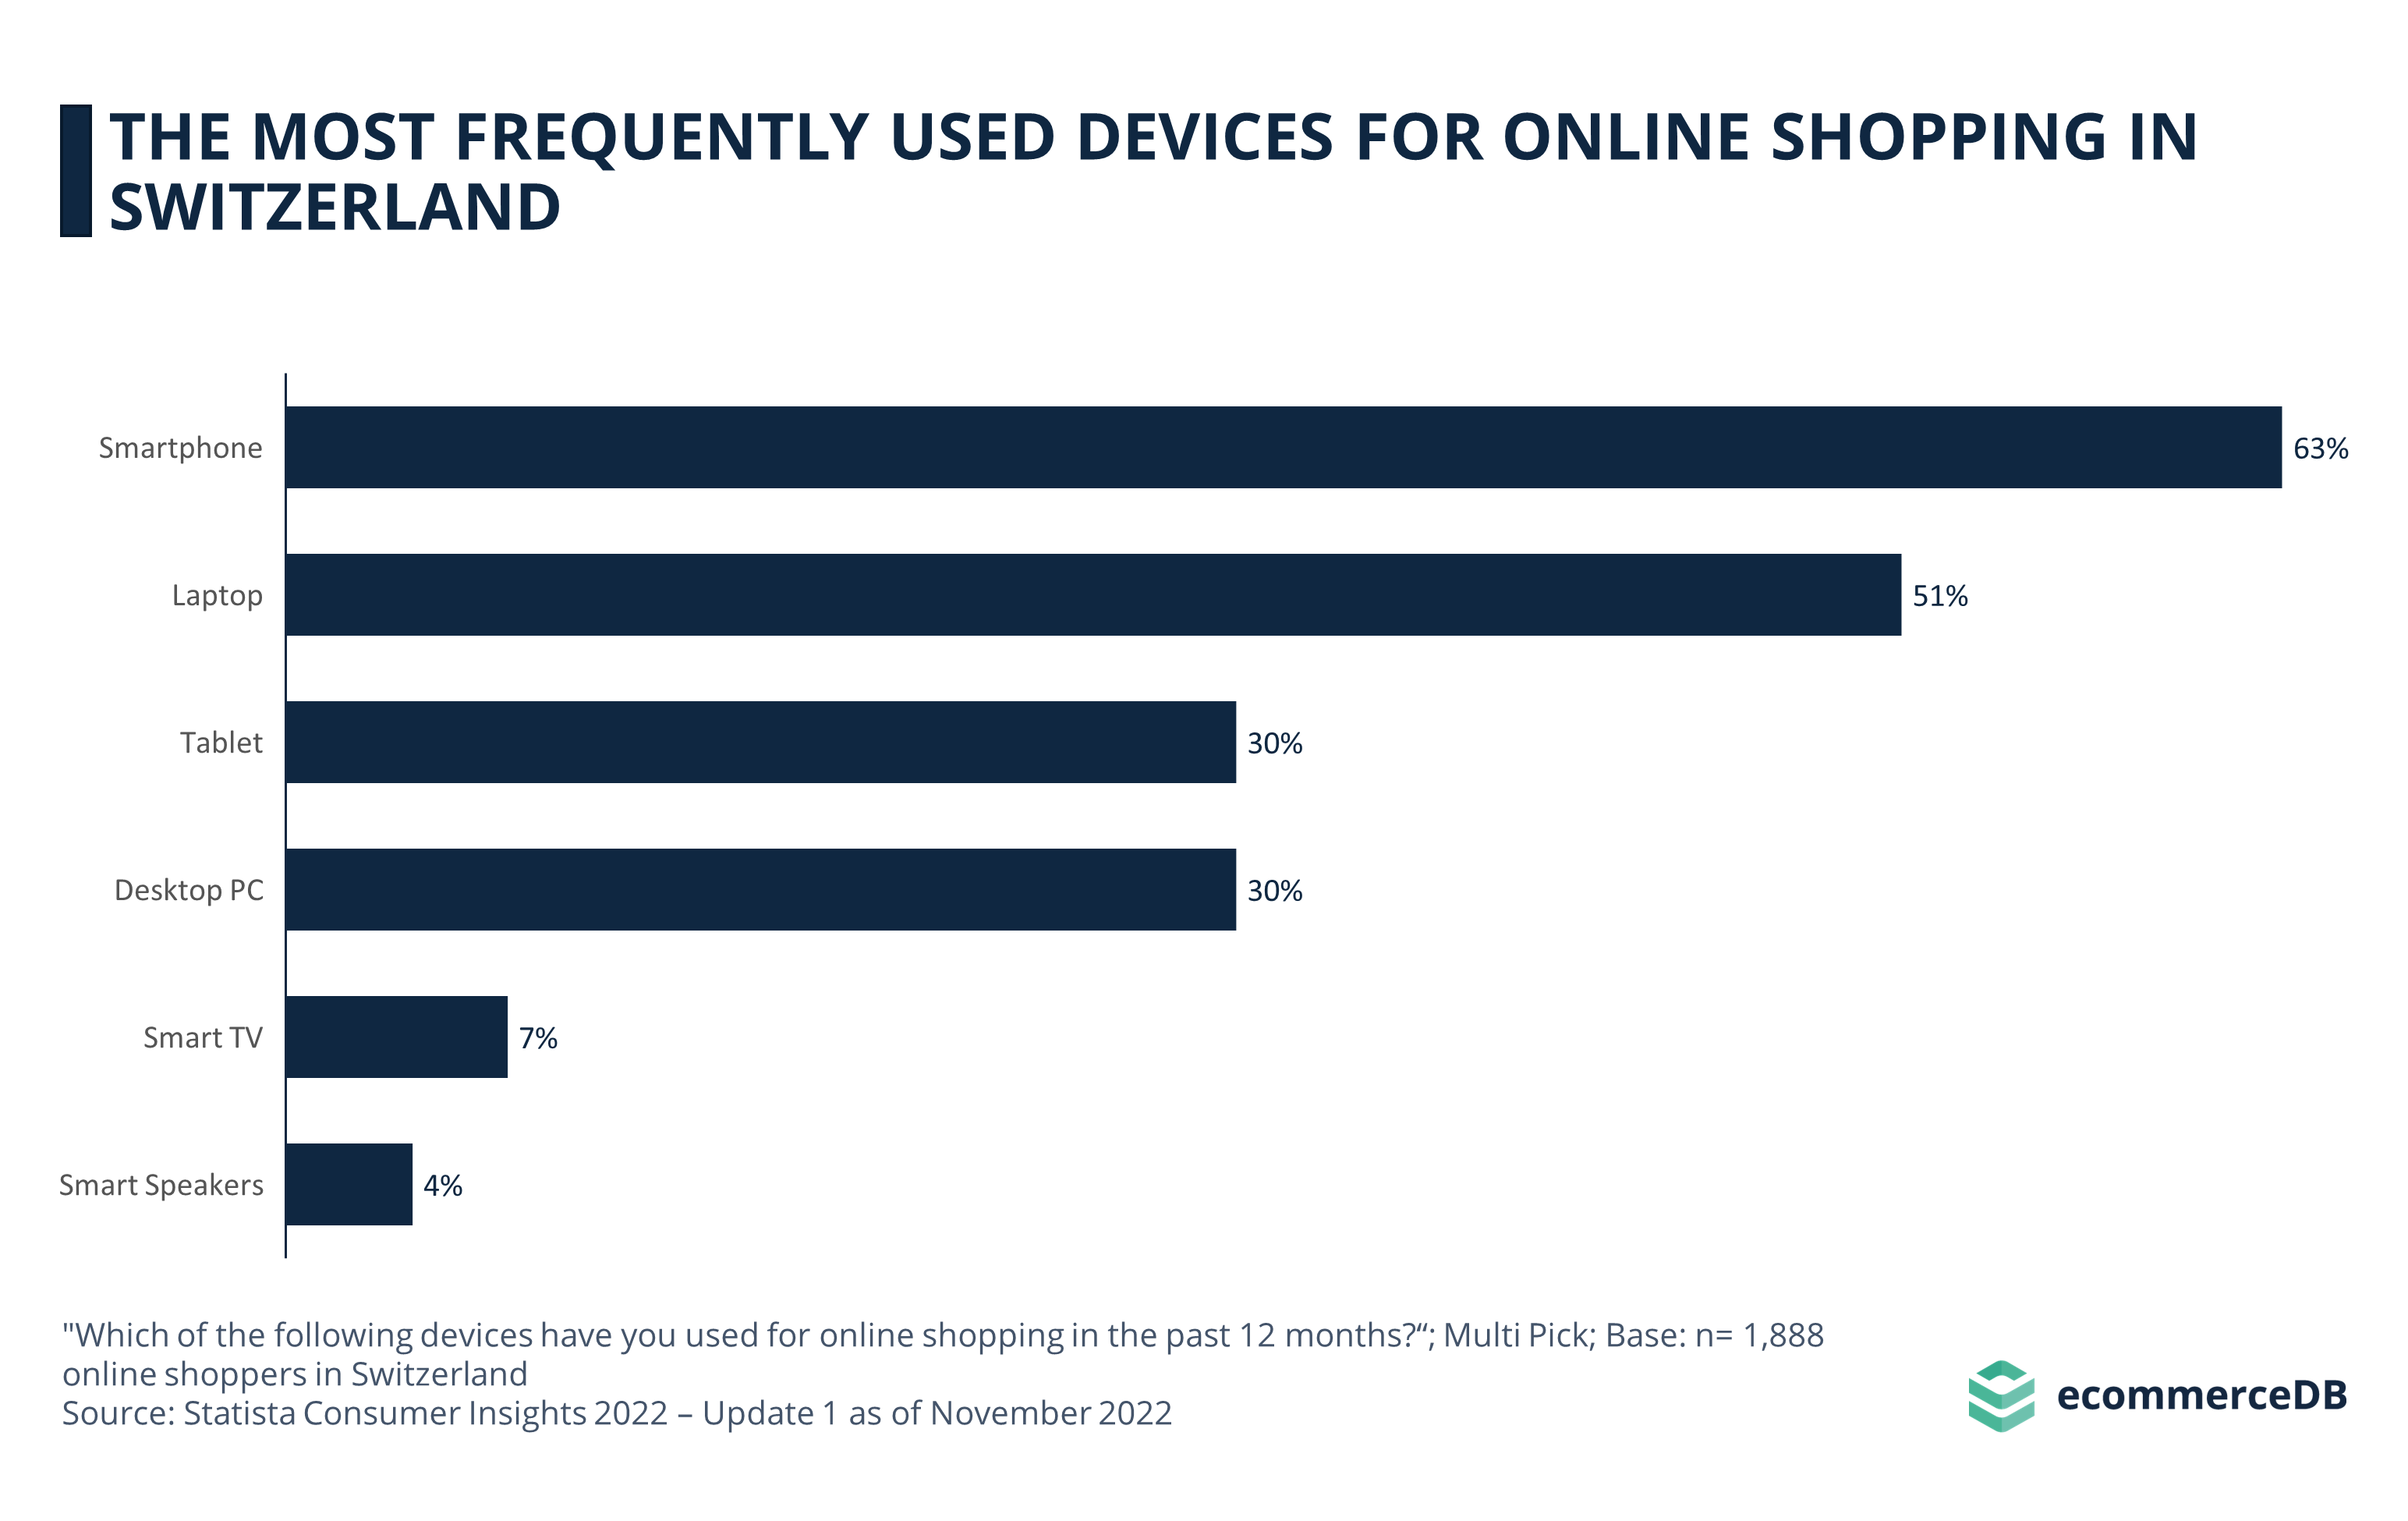 The Most Frequently Used Devices For Online Shopping in Switzerland